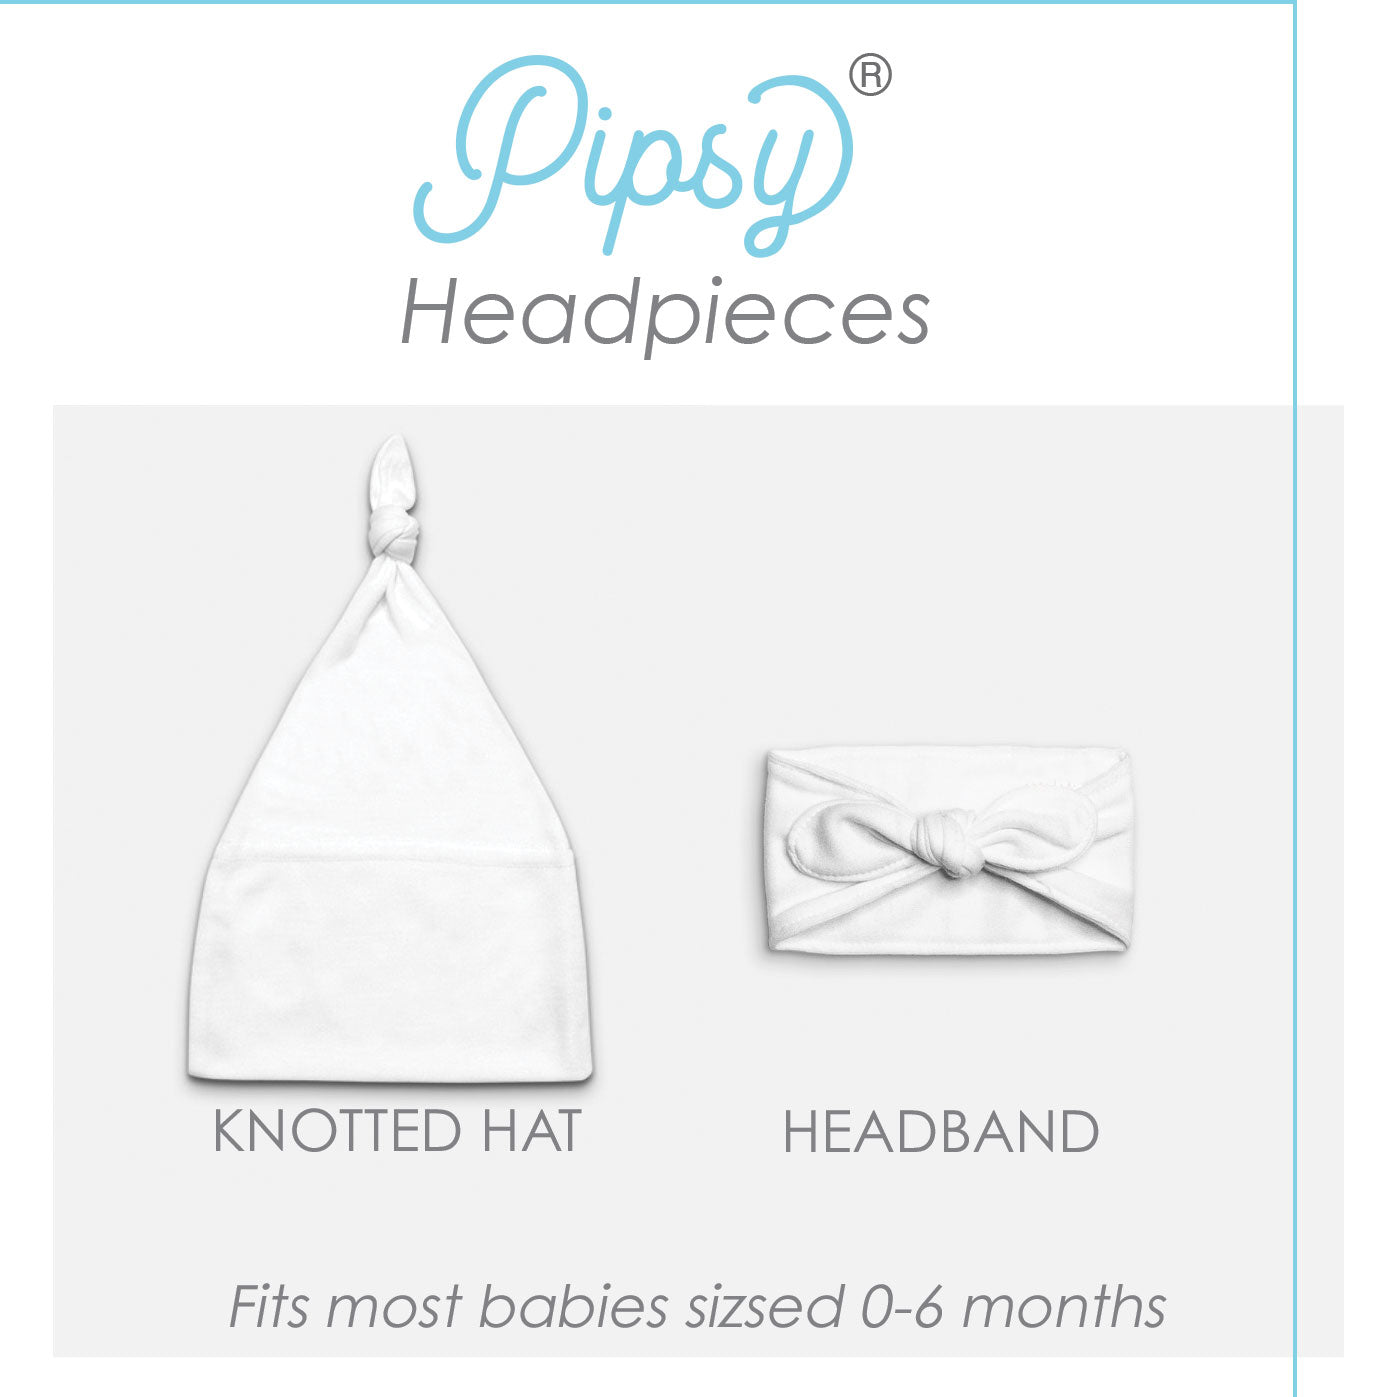 Pipsy headpiece options - knotted hat or headband